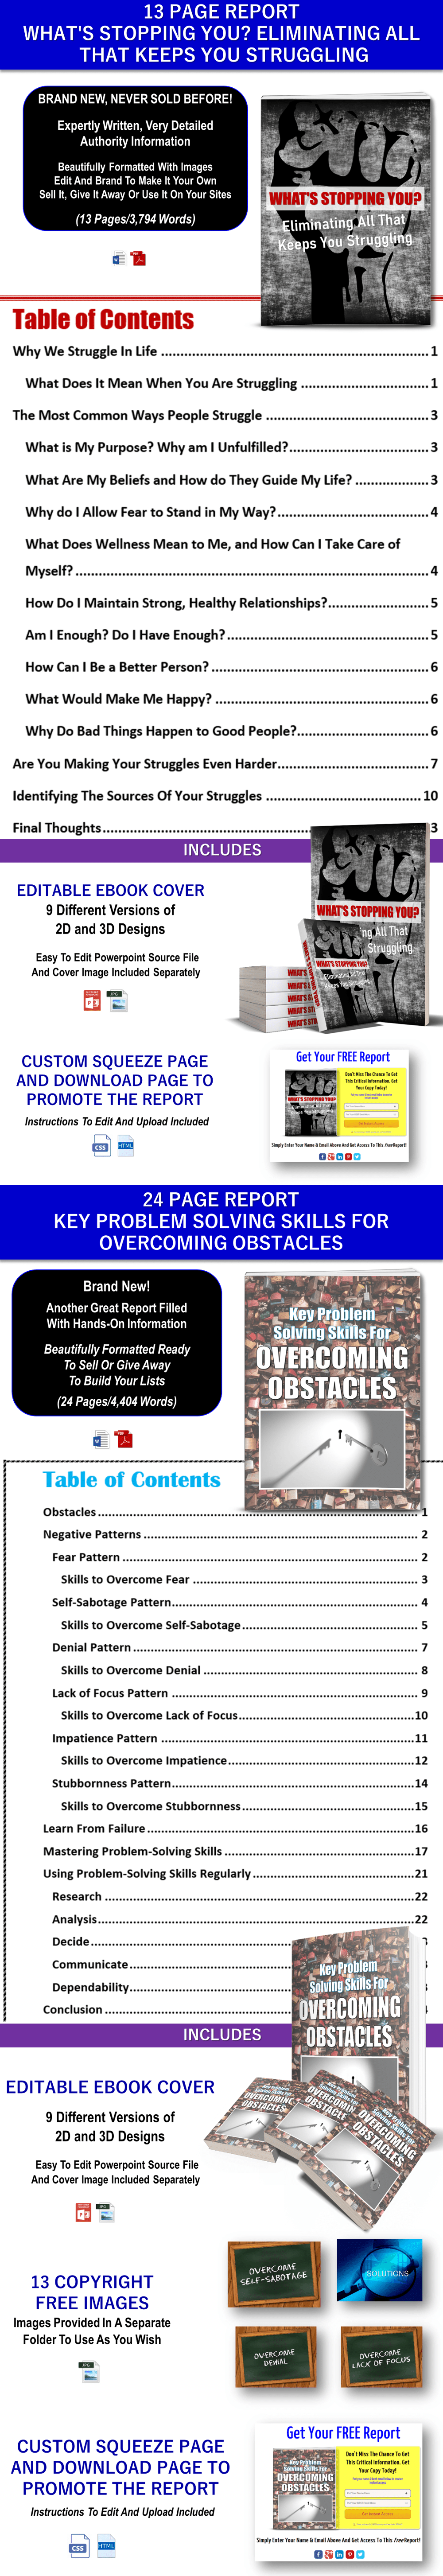 Overcome Struggle and Obstacles Content - Private Label Rights